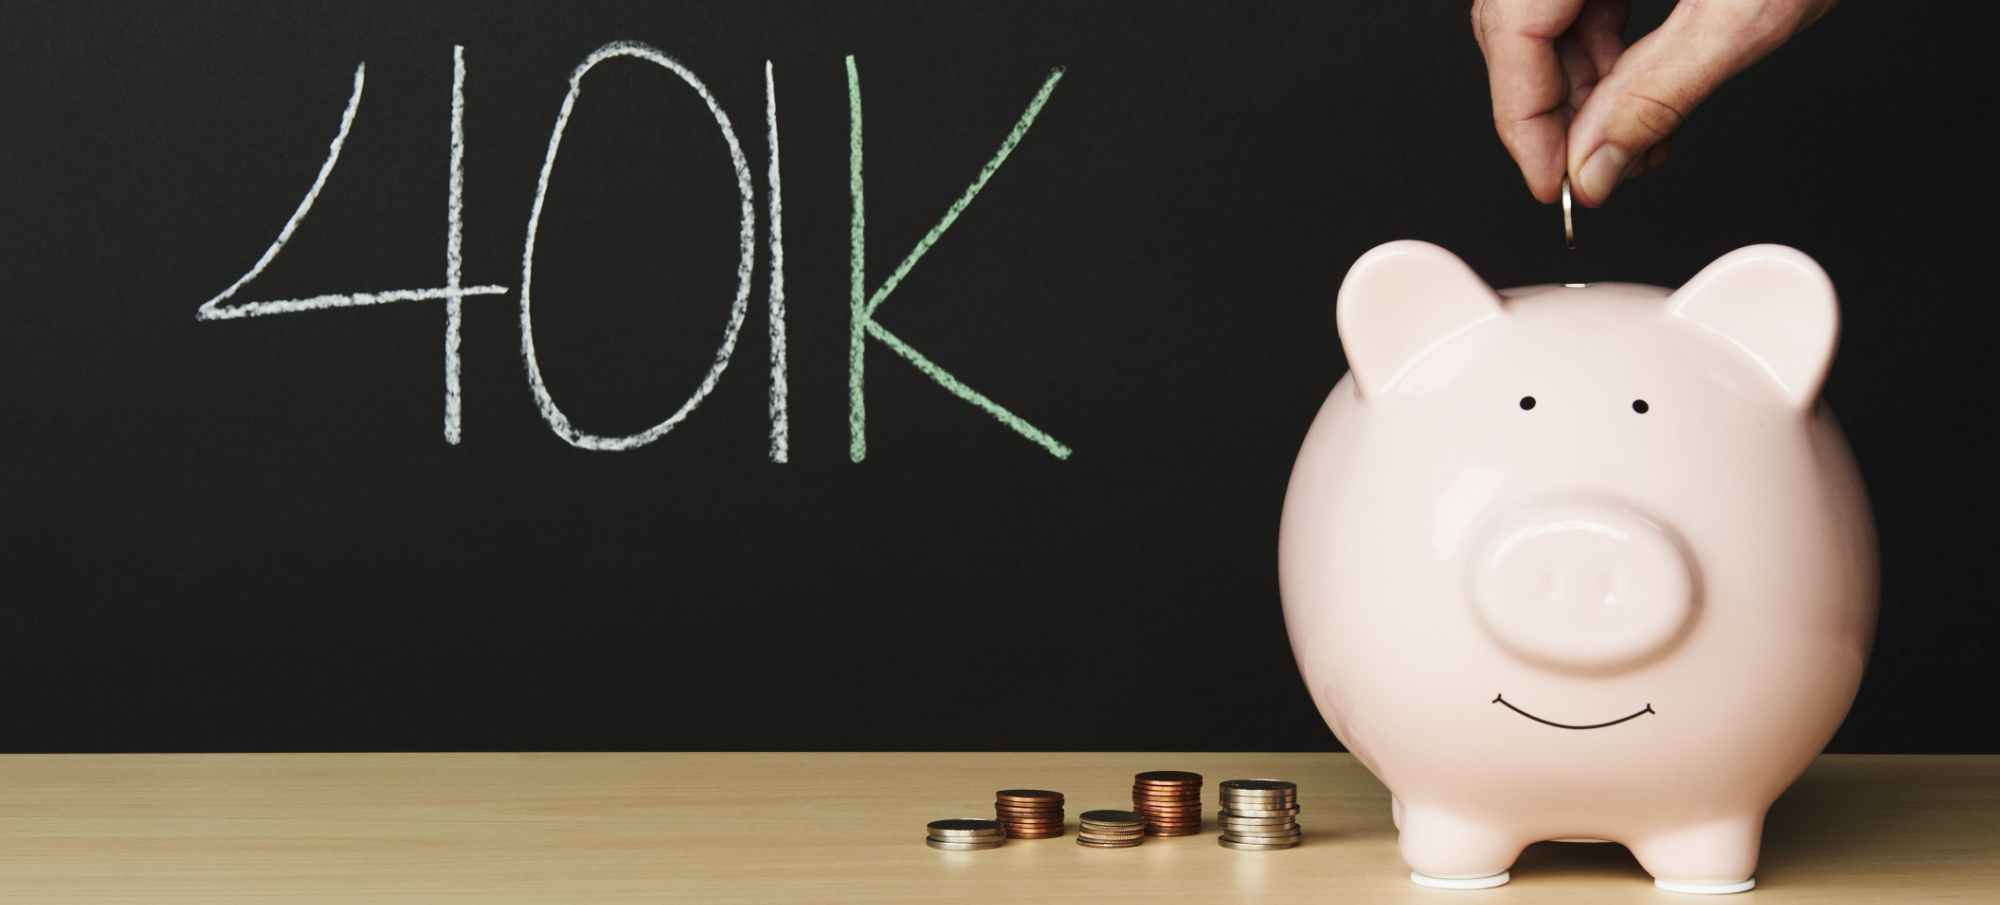 401(k) For Small Business Kirkwood, MO | Retirement Planners | 401(k) Services Near Kirkwood